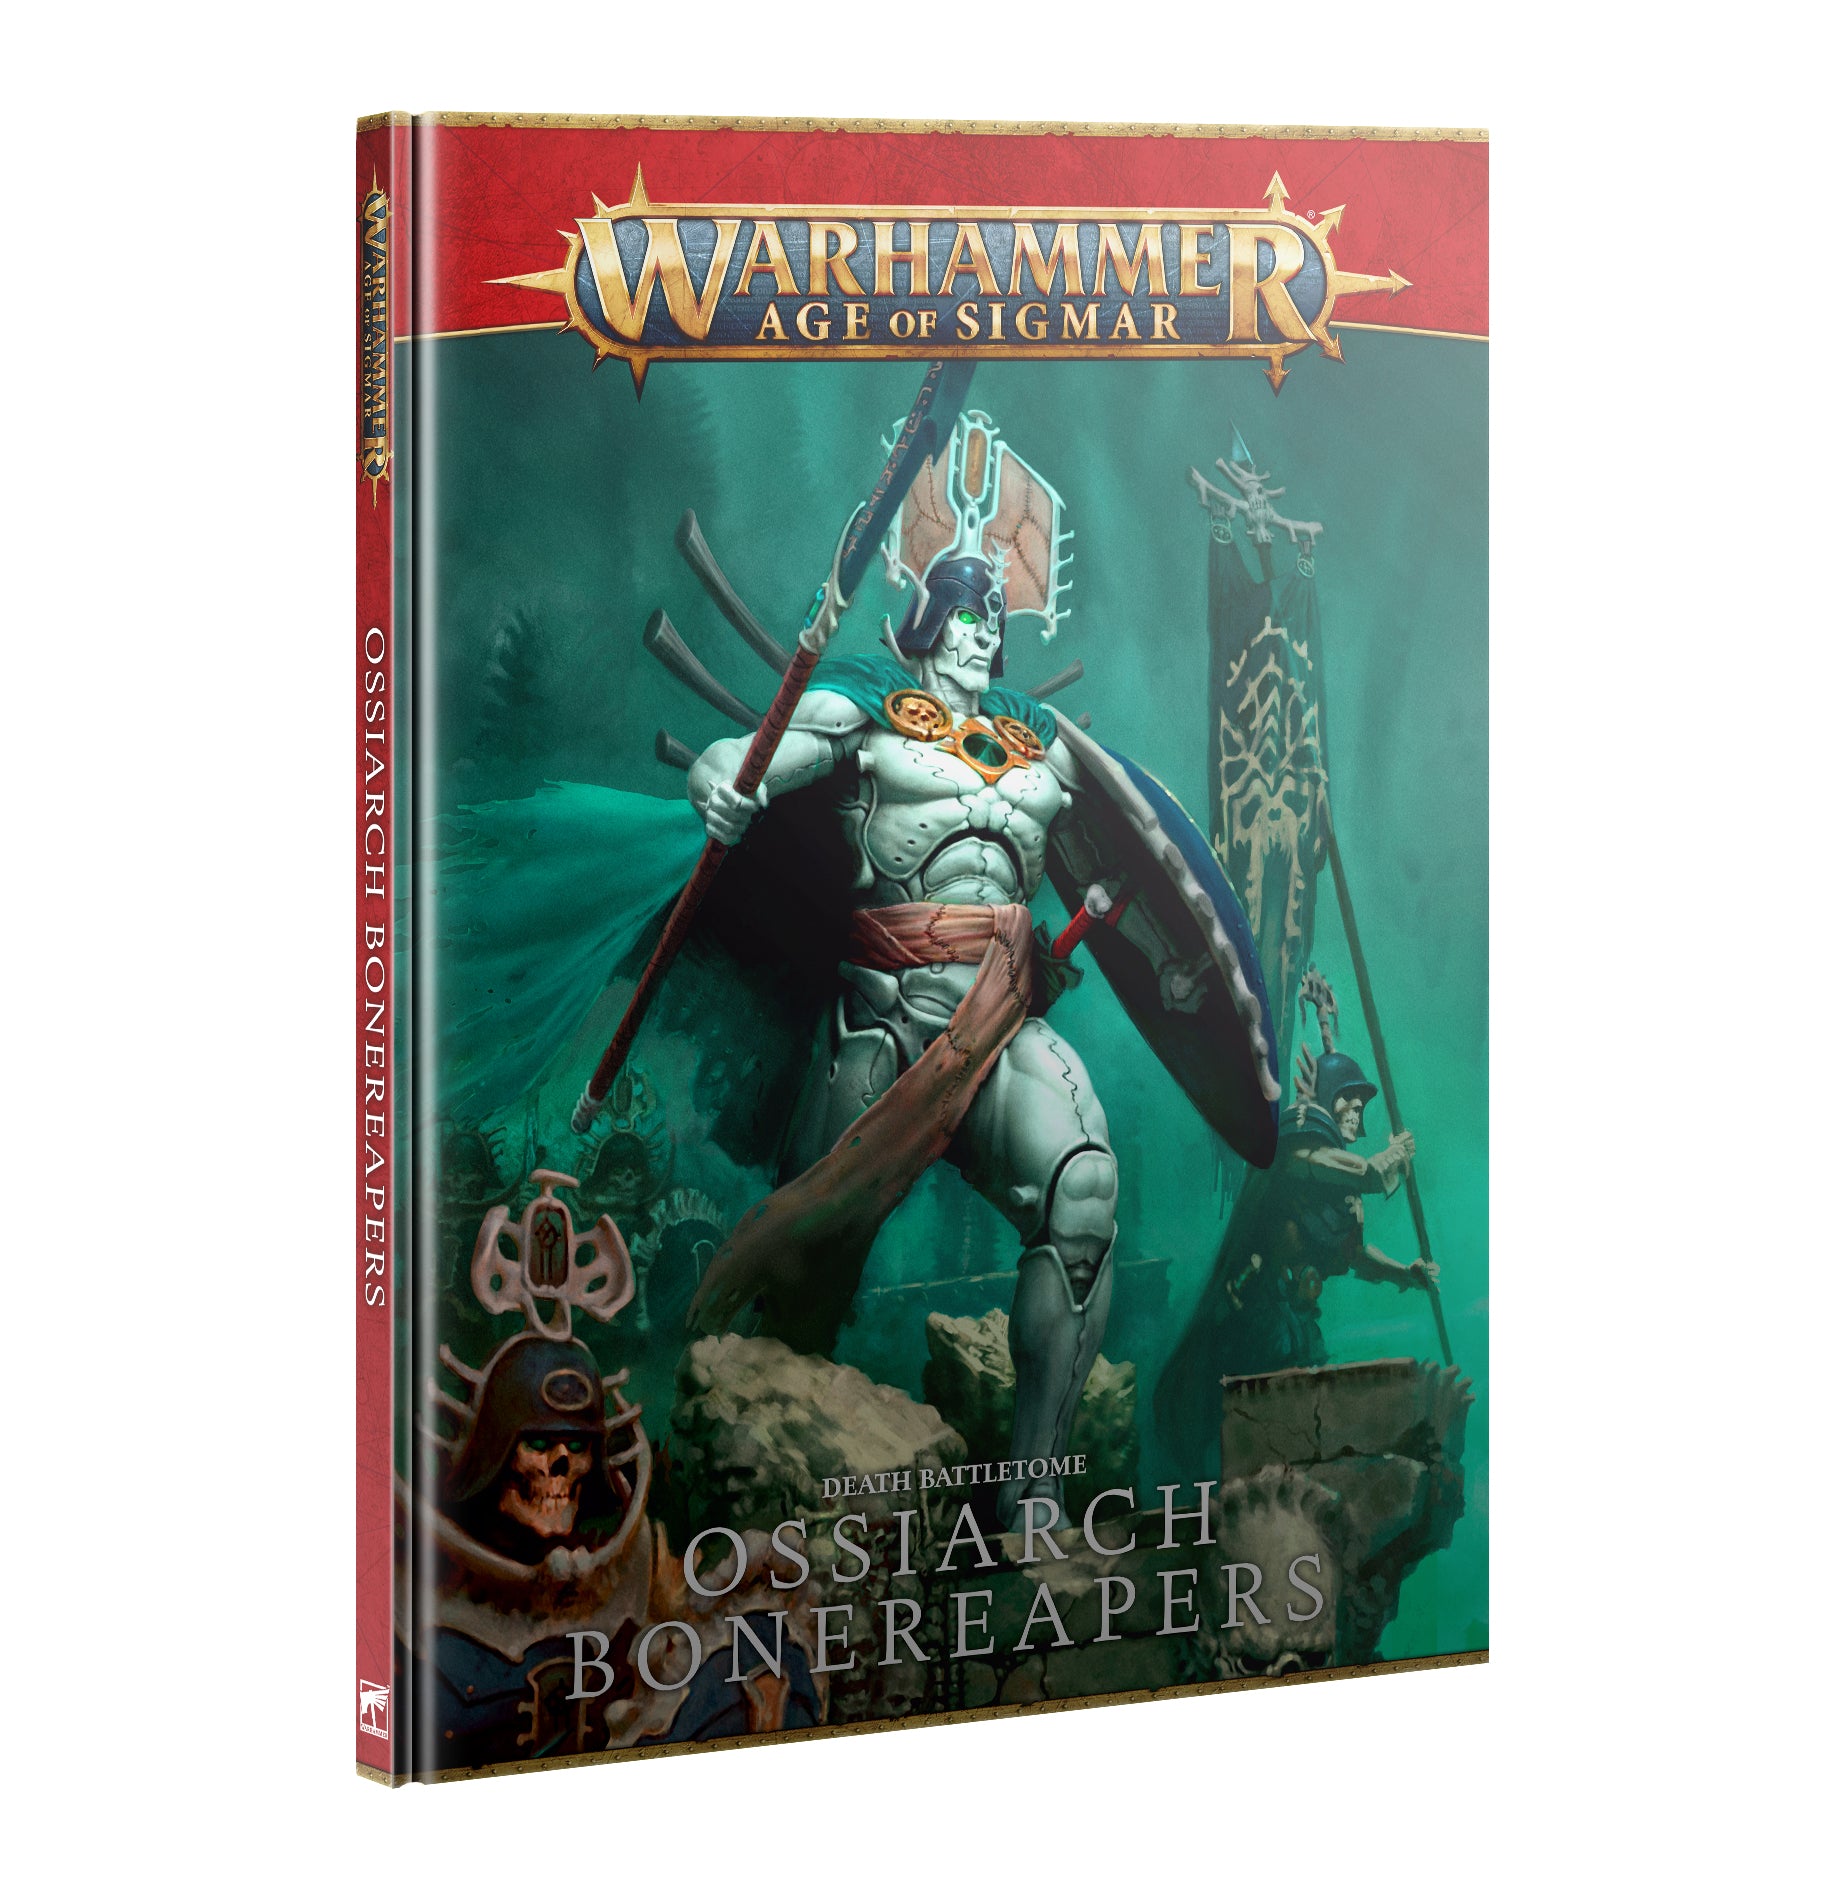 Warhammer Age of Sigmar Battletome Ossiarch Bonereapers MKICA8927H |0|